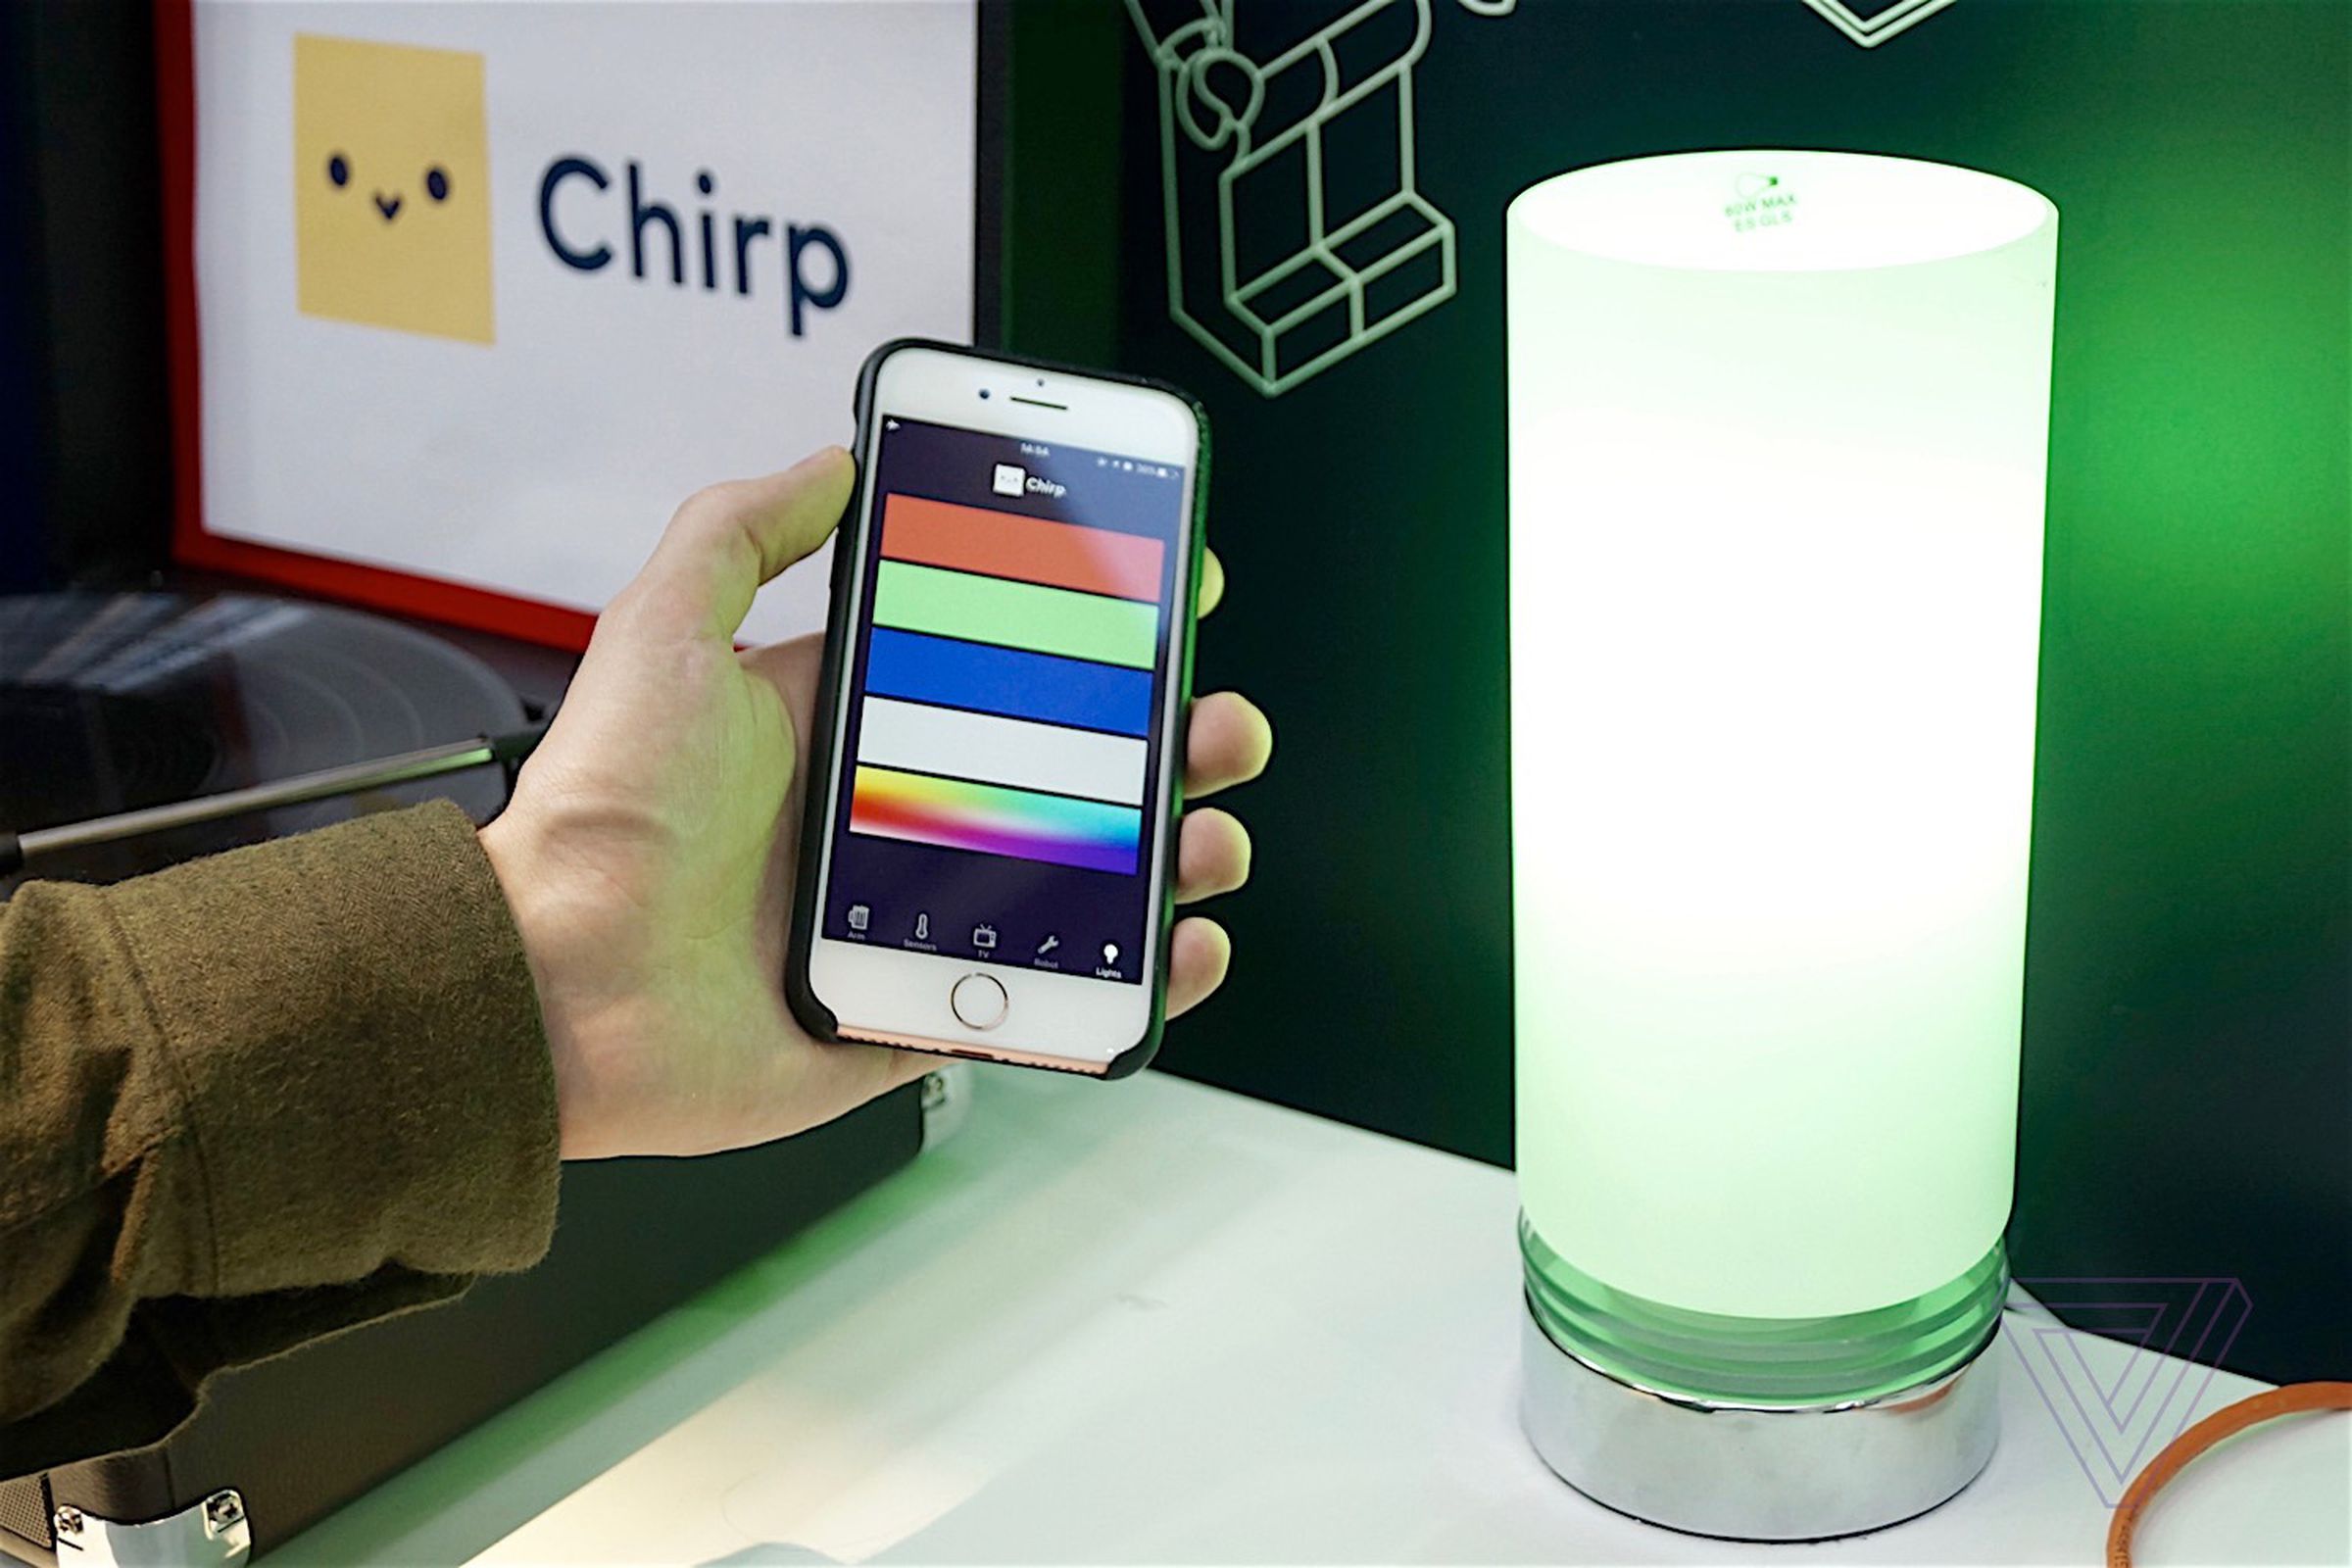 Chirp can be used to control IOT devices like the Philips Hue lamp